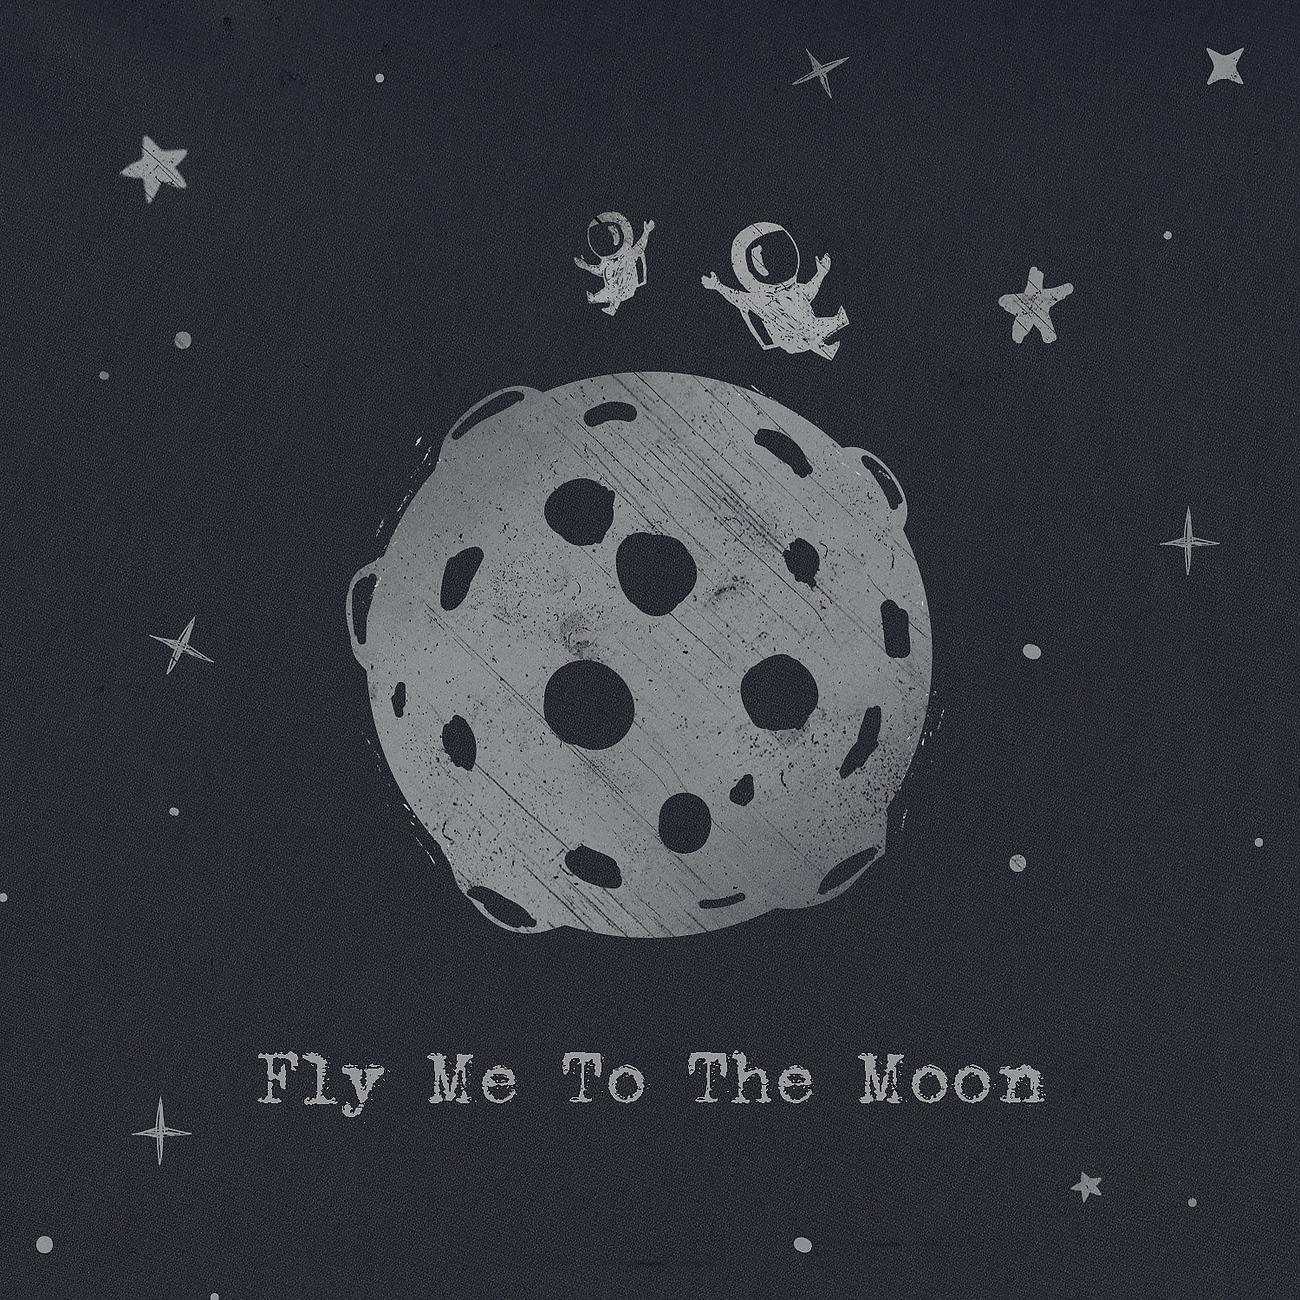 Fly the moon слушать. Fly me to the Moon. The Macarons Project. Fly me to the Moon обложка. Fly me to the Moon русская версия.